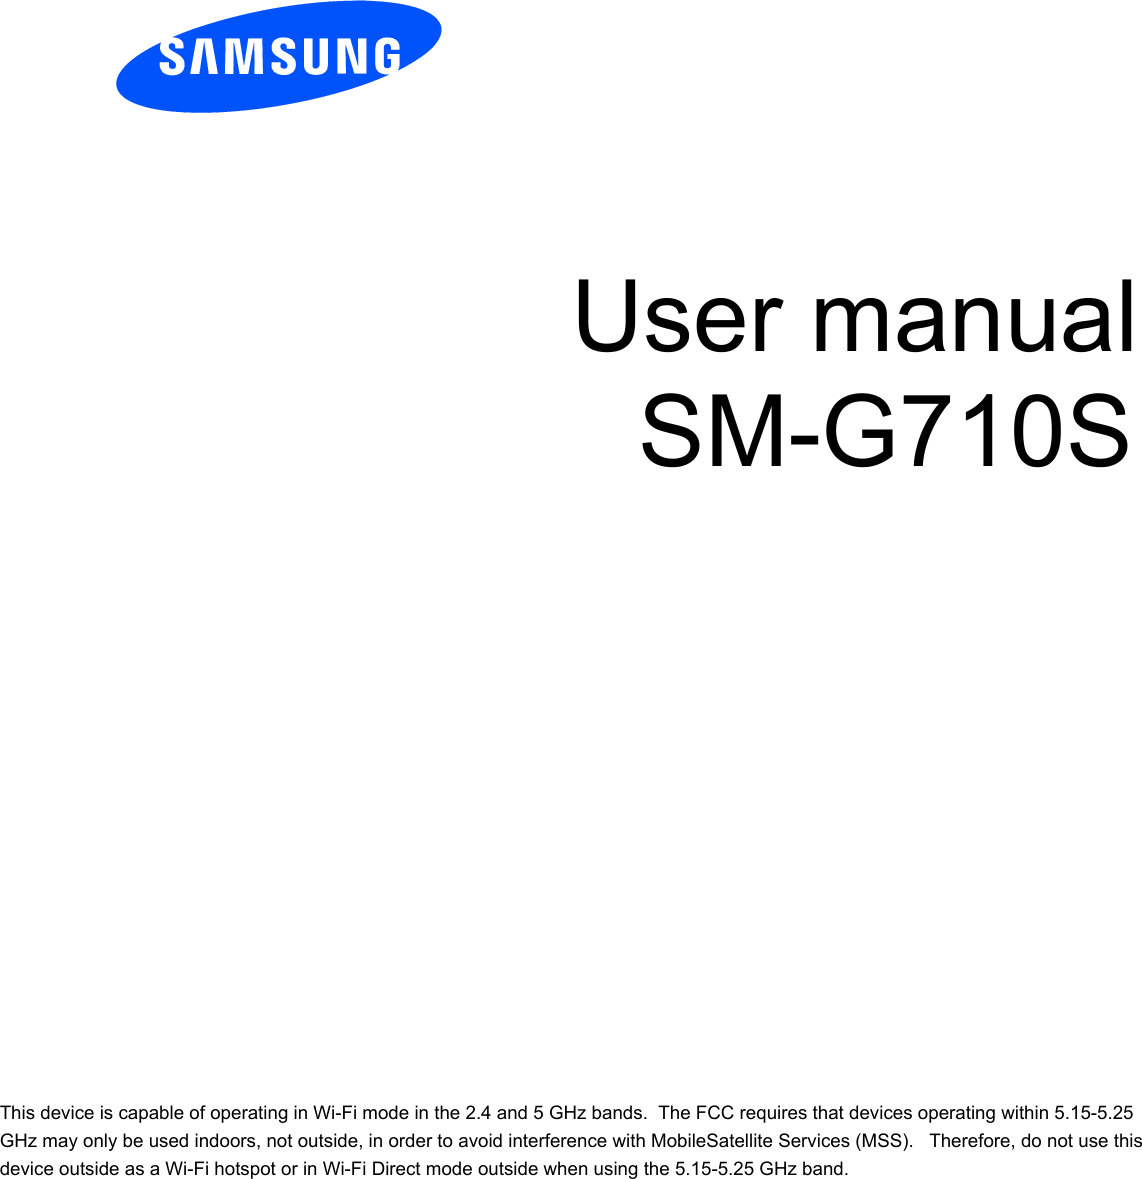             User manual SM-G710S              This device is capable of operating in Wi-Fi mode in the 2.4 and 5 GHz bands.  The FCC requires that devices operating within 5.15-5.25 GHz may only be used indoors, not outside, in order to avoid interference with MobileSatellite Services (MSS).   Therefore, do not use this device outside as a Wi-Fi hotspot or in Wi-Fi Direct mode outside when using the 5.15-5.25 GHz band. 